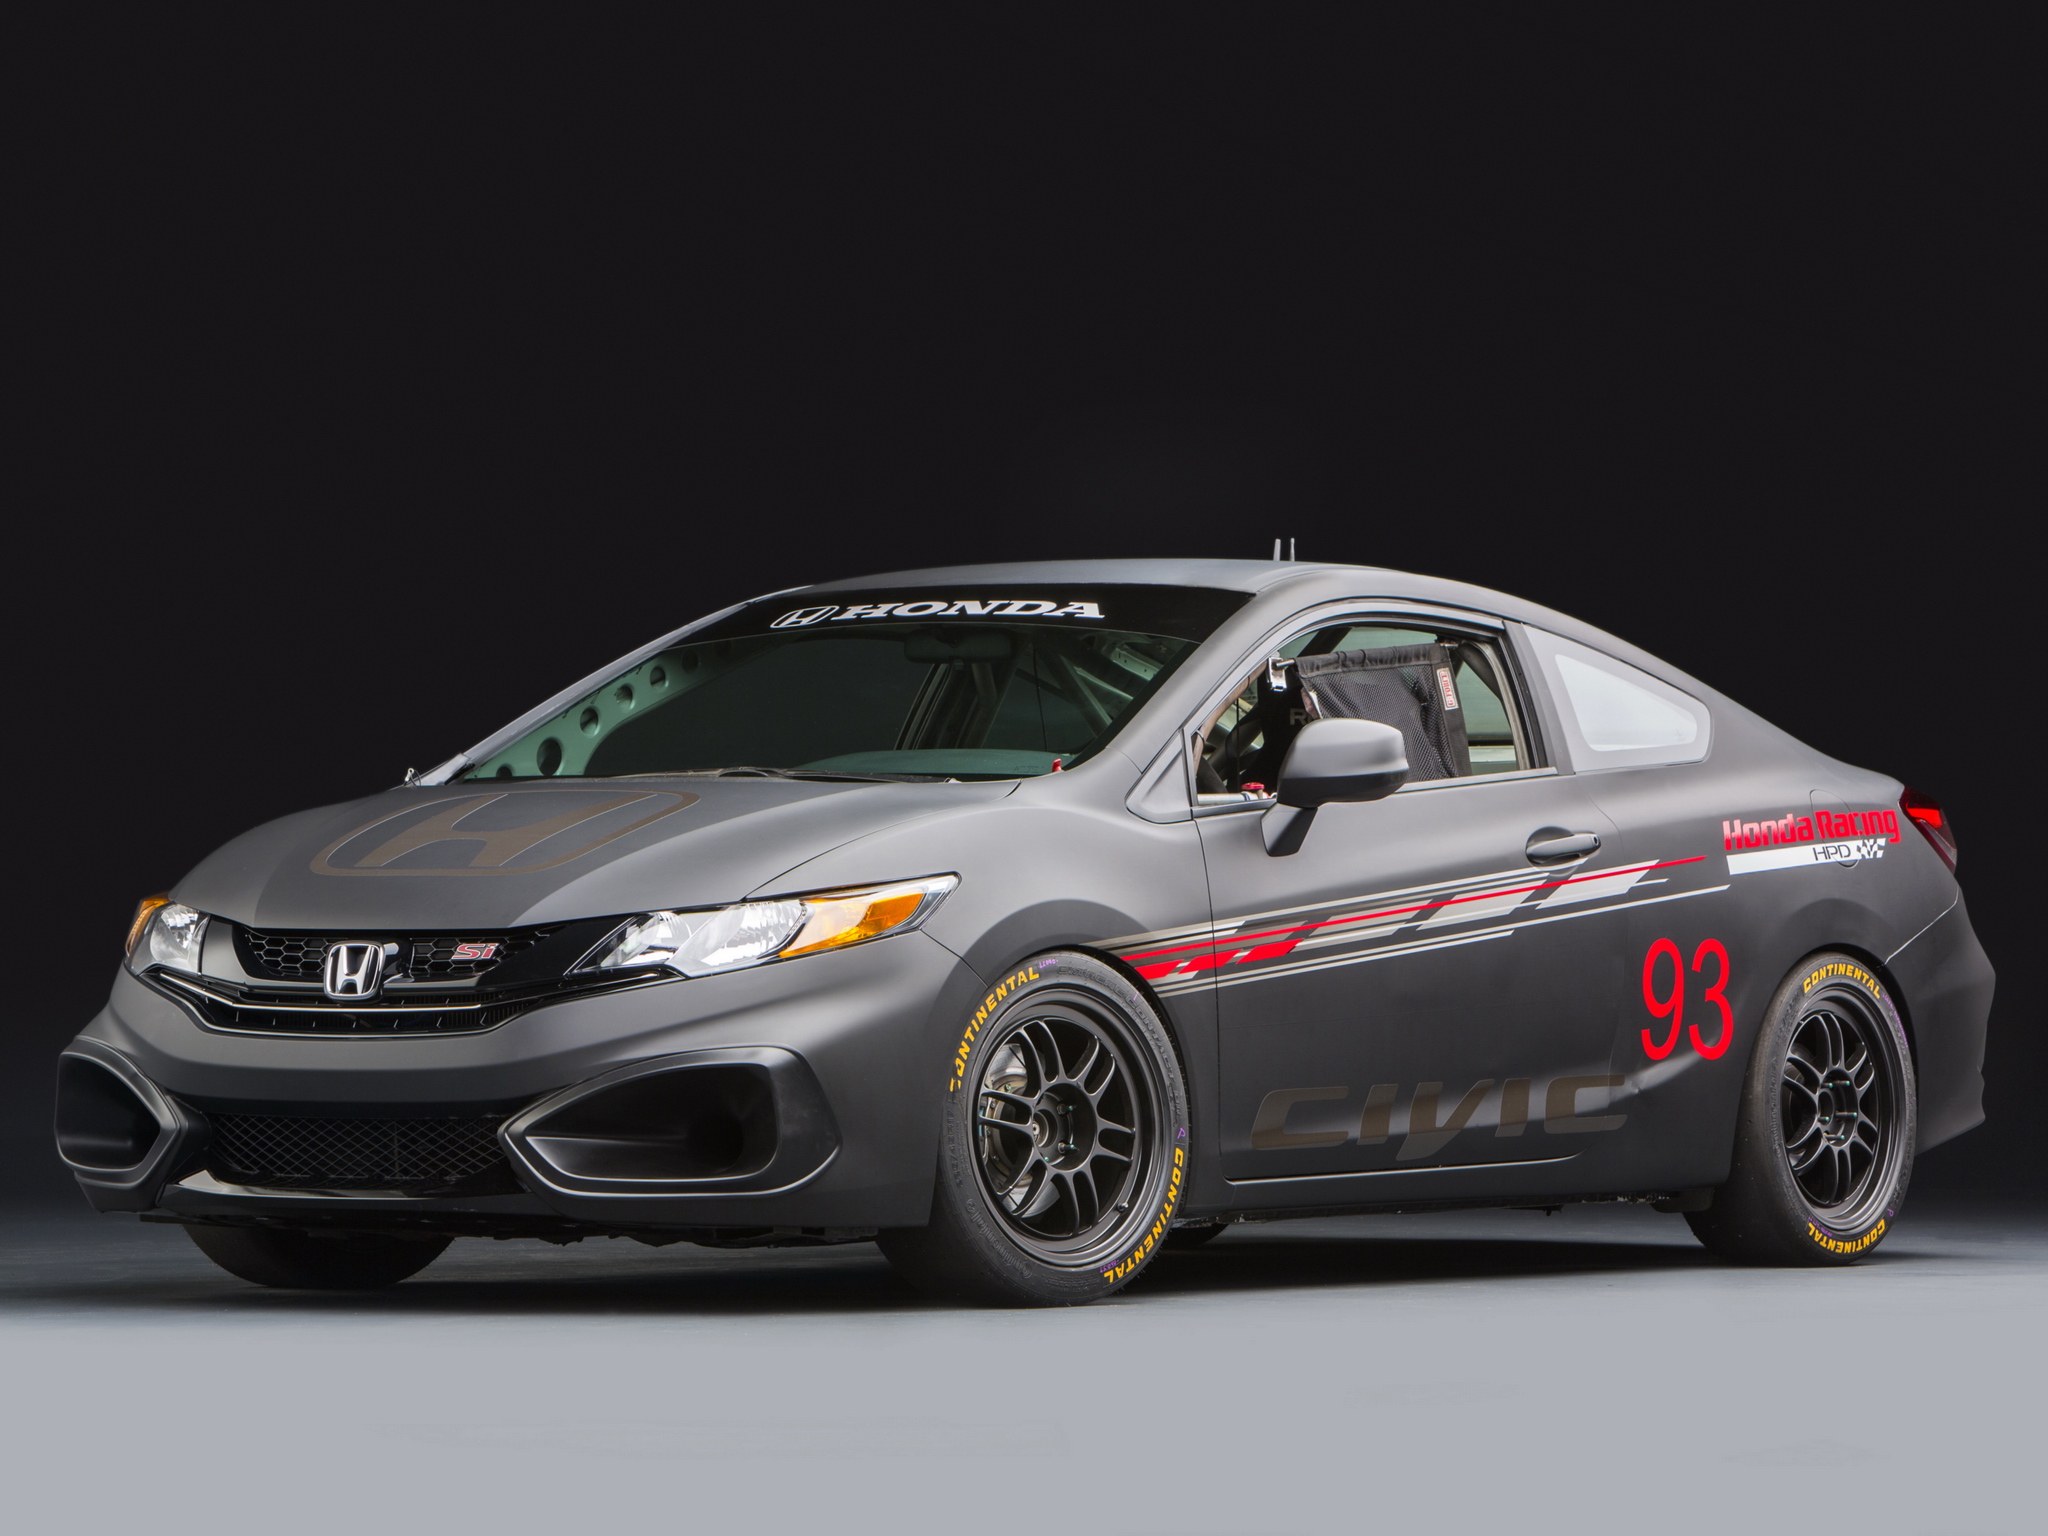 Honda Civic Si Coupe Race Car By Hpd Tuning Racing T Wallpaper